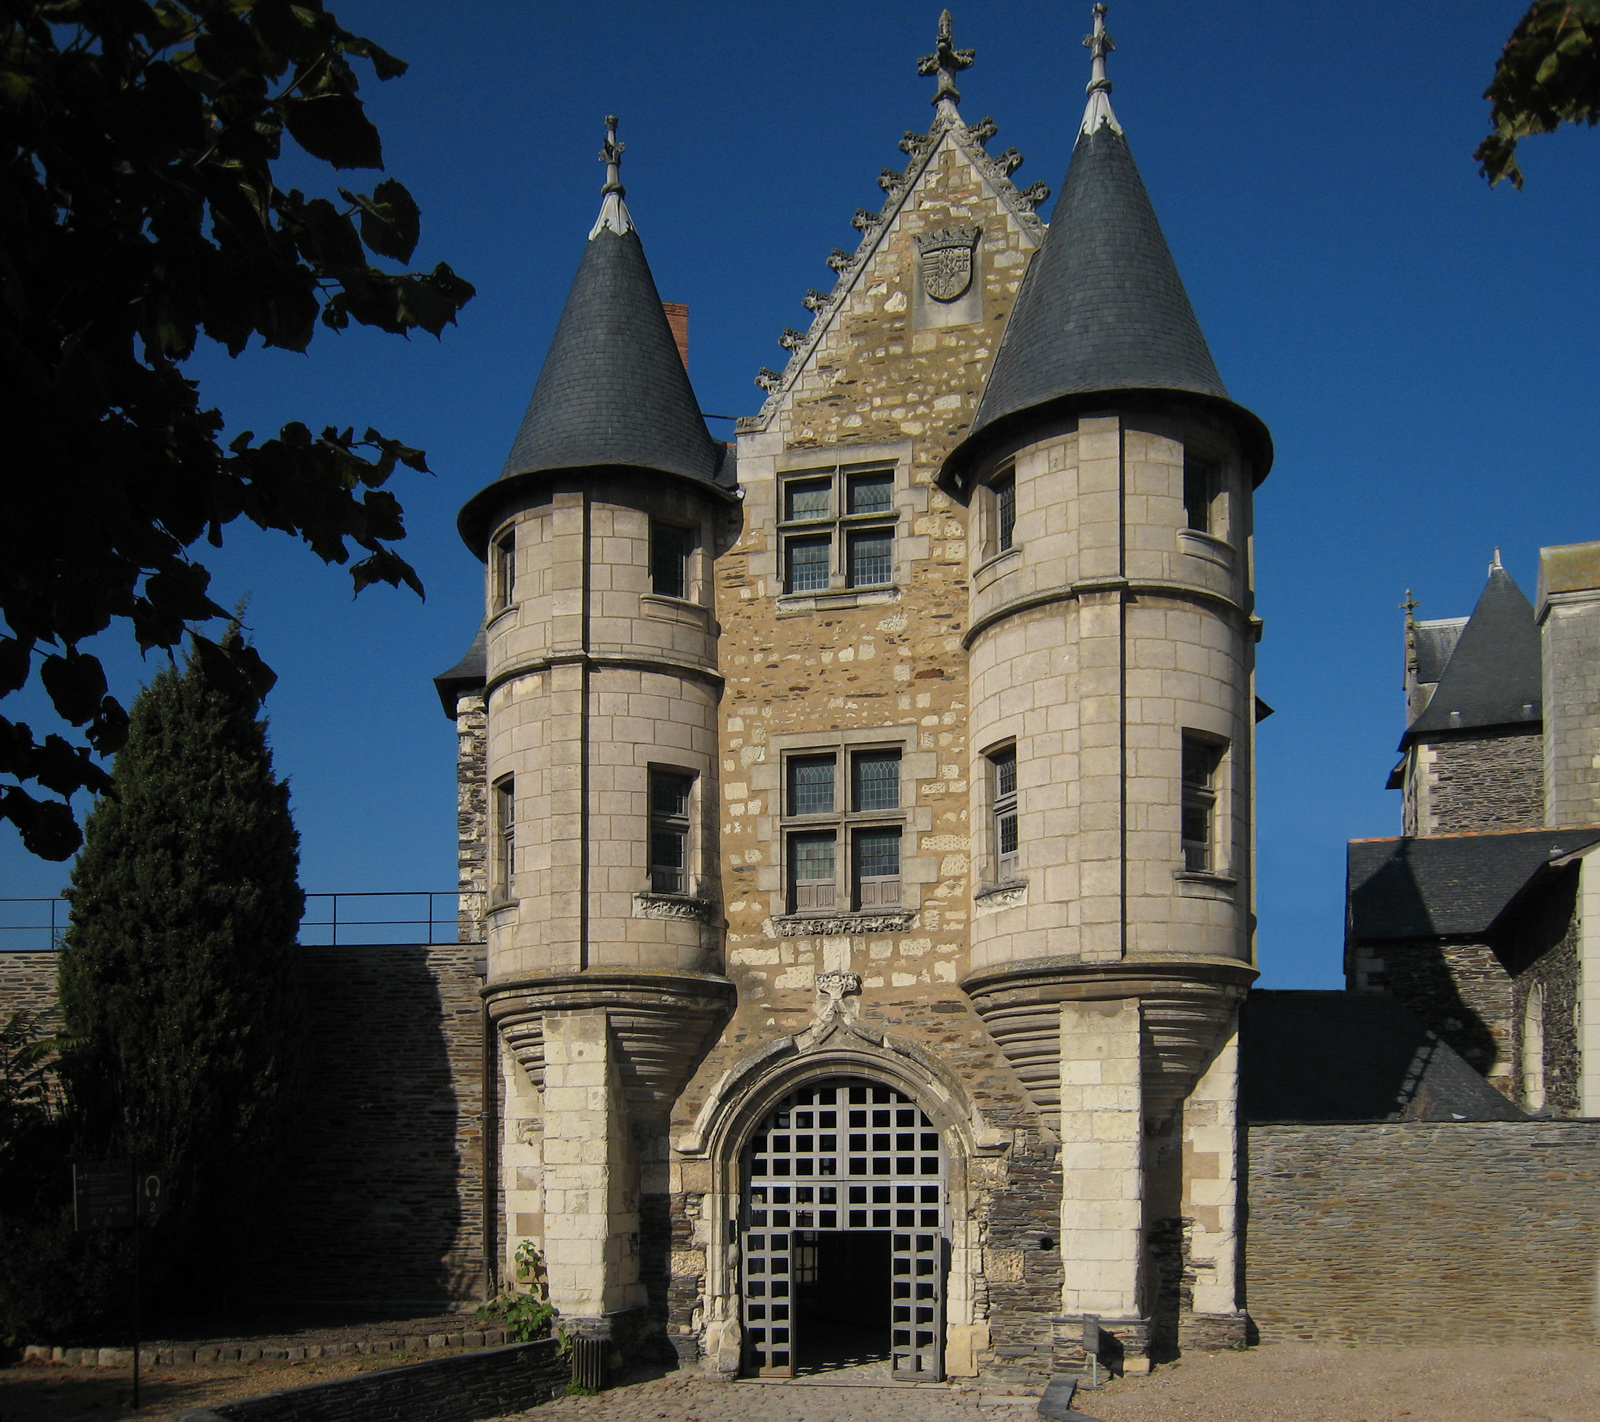  Angers_Castle_Chatelet_2007